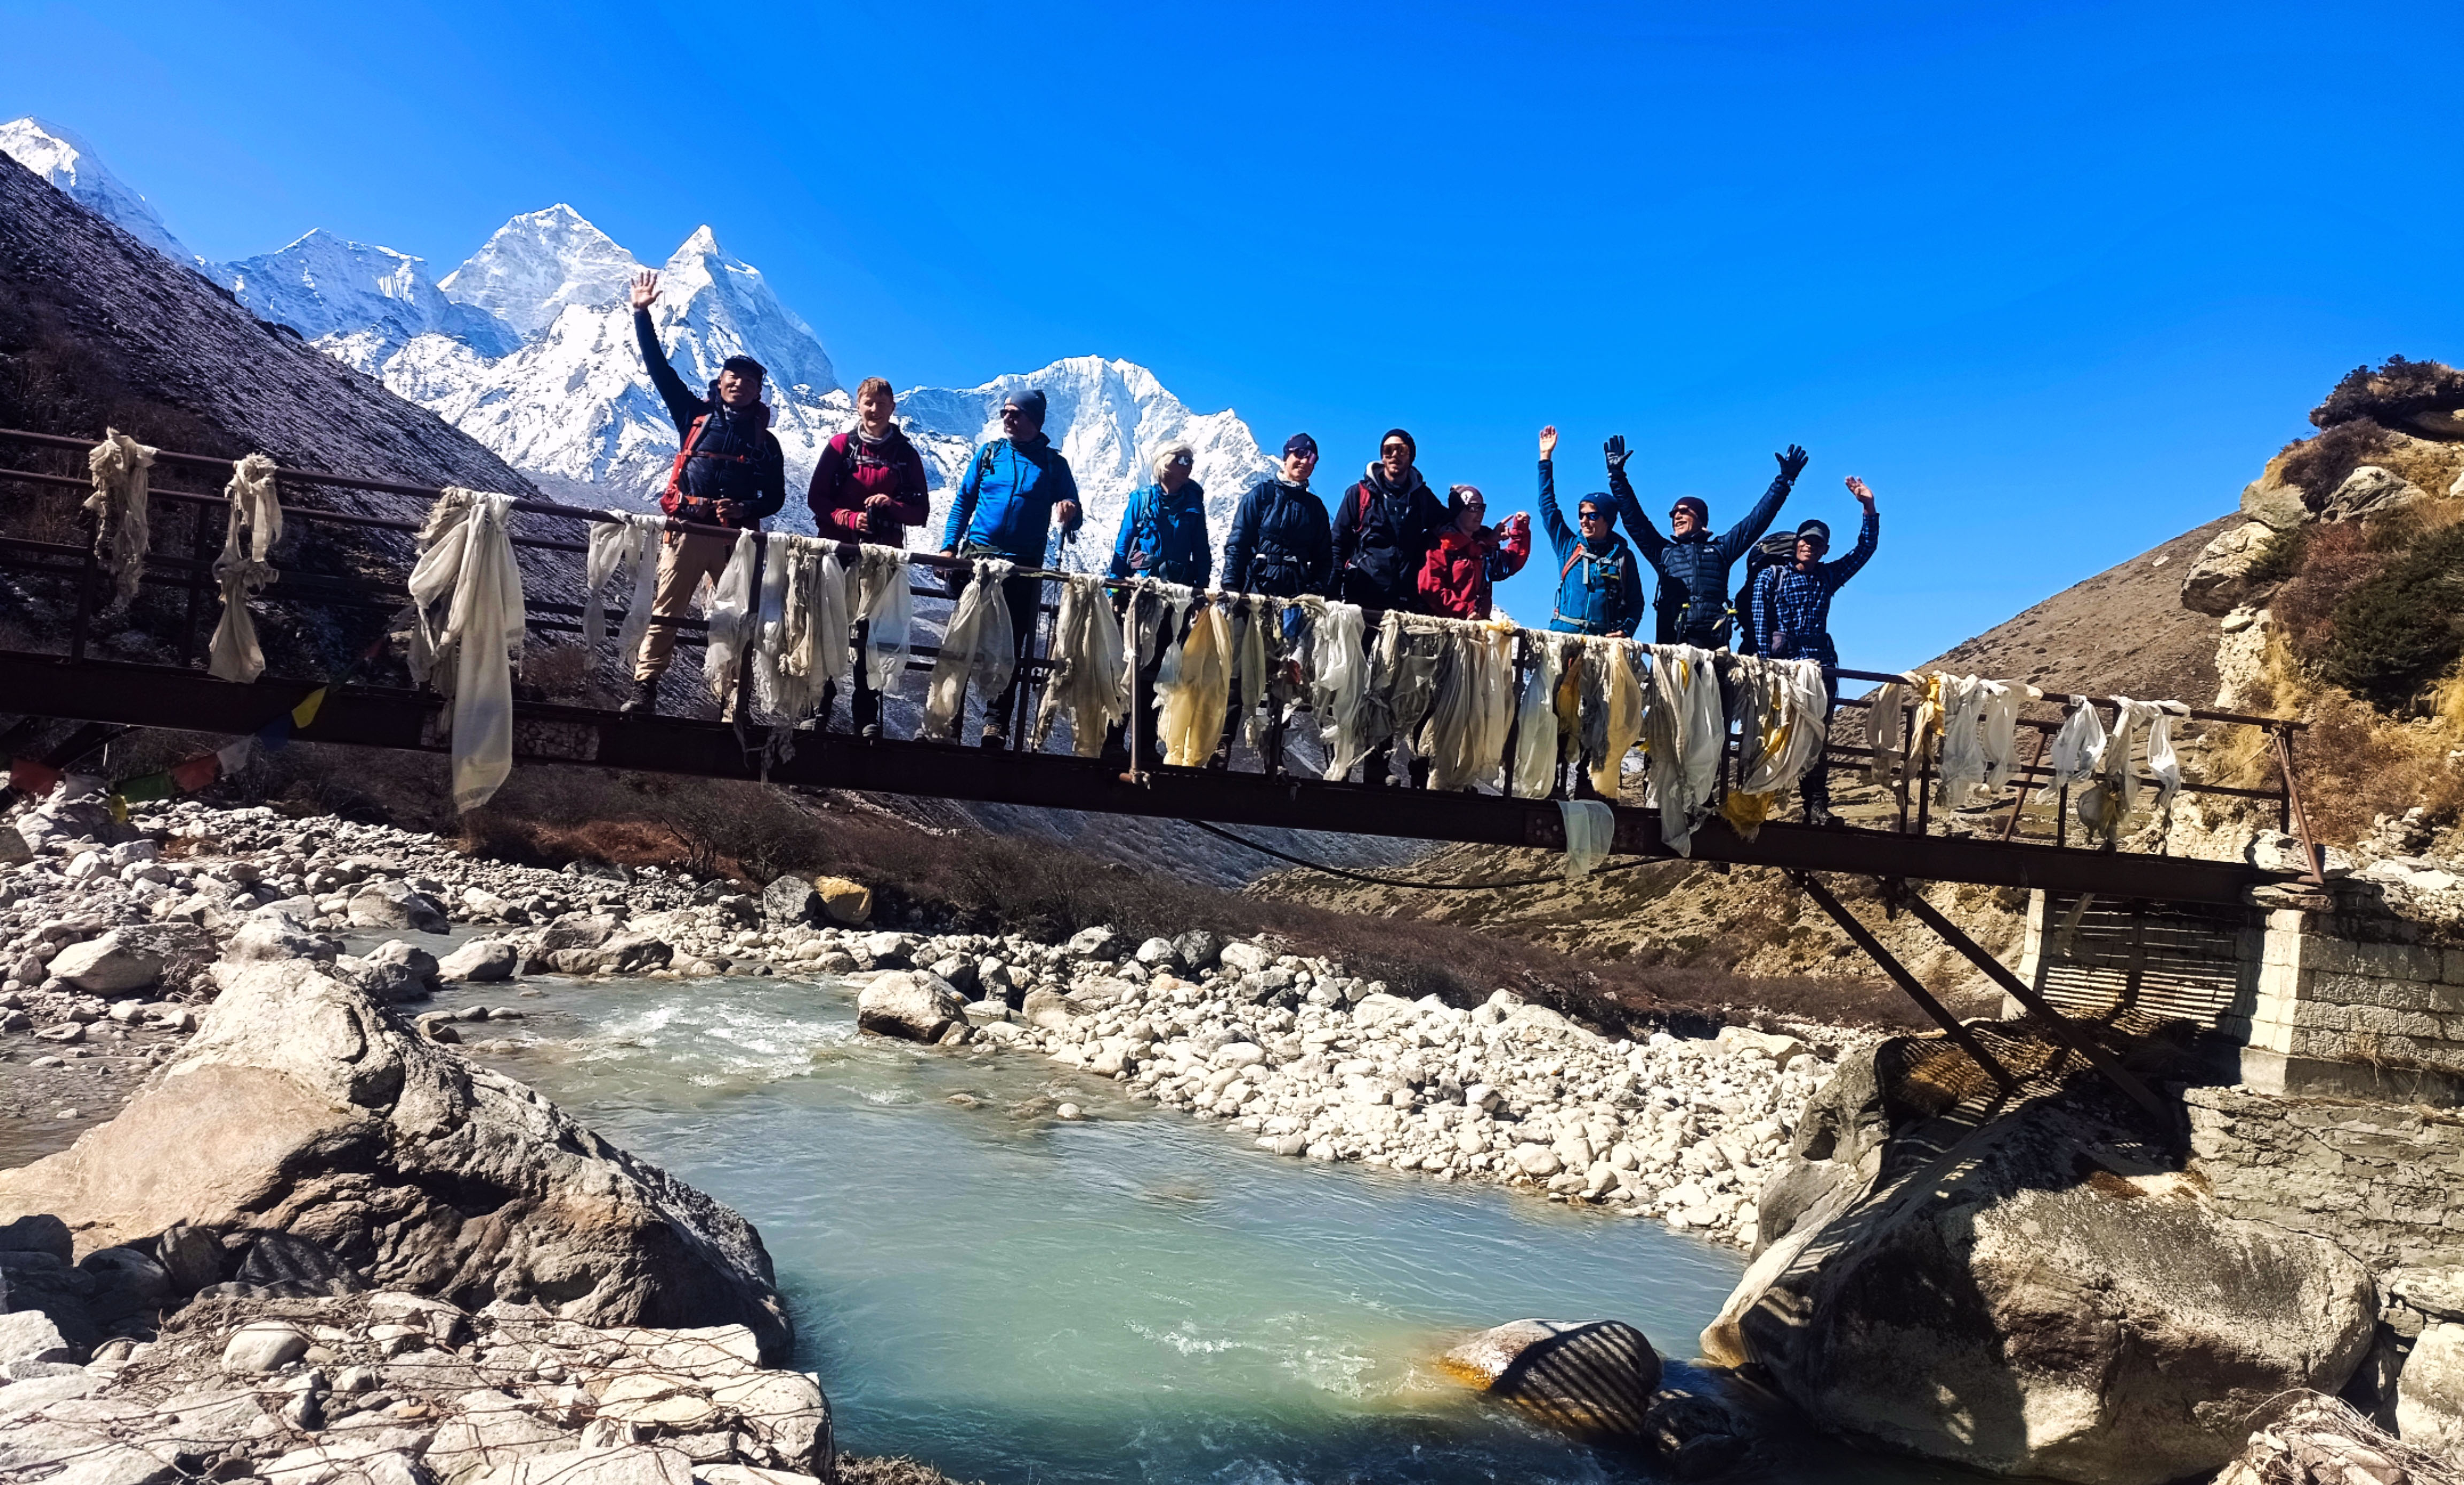 On the way to Everest Base Camp Trek